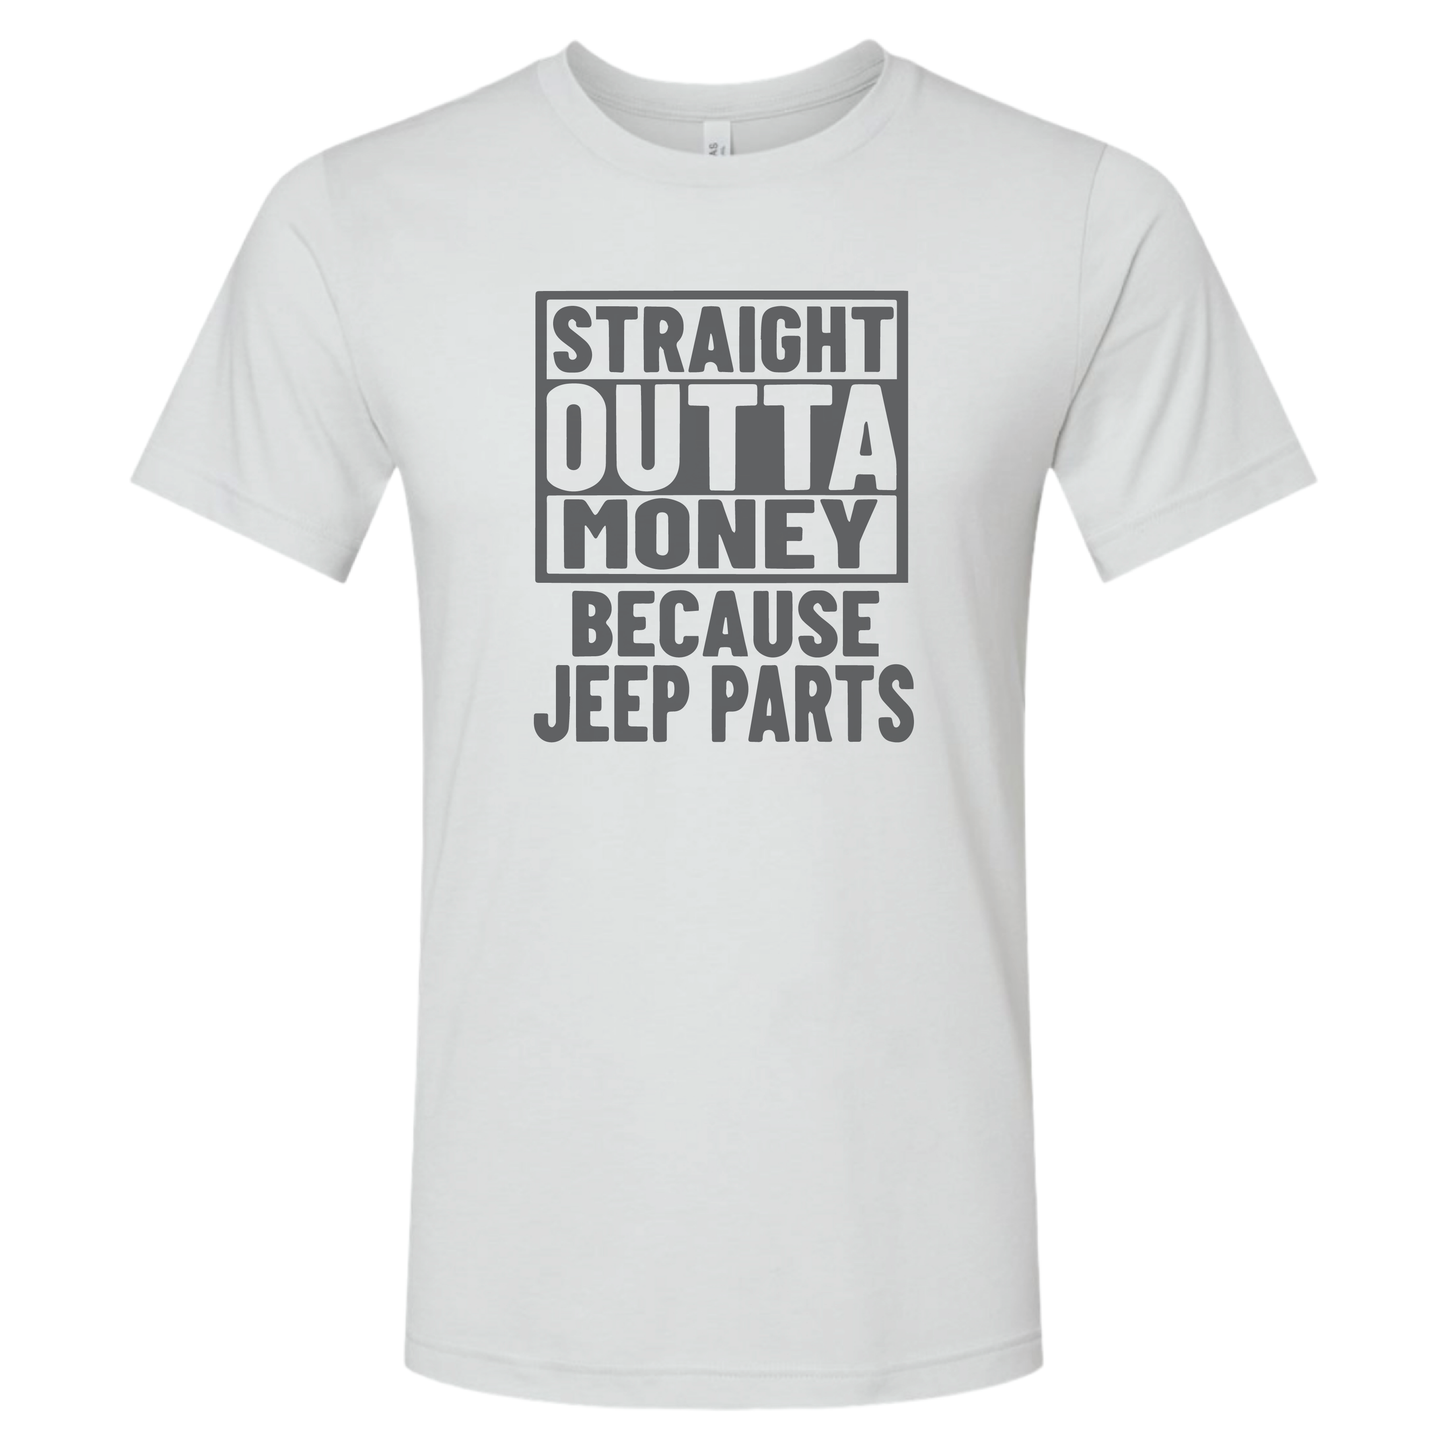 Straight Outta Money - Shirt, Tank Top, Long Sleeve or Hoodie - Available in Multiple Colors